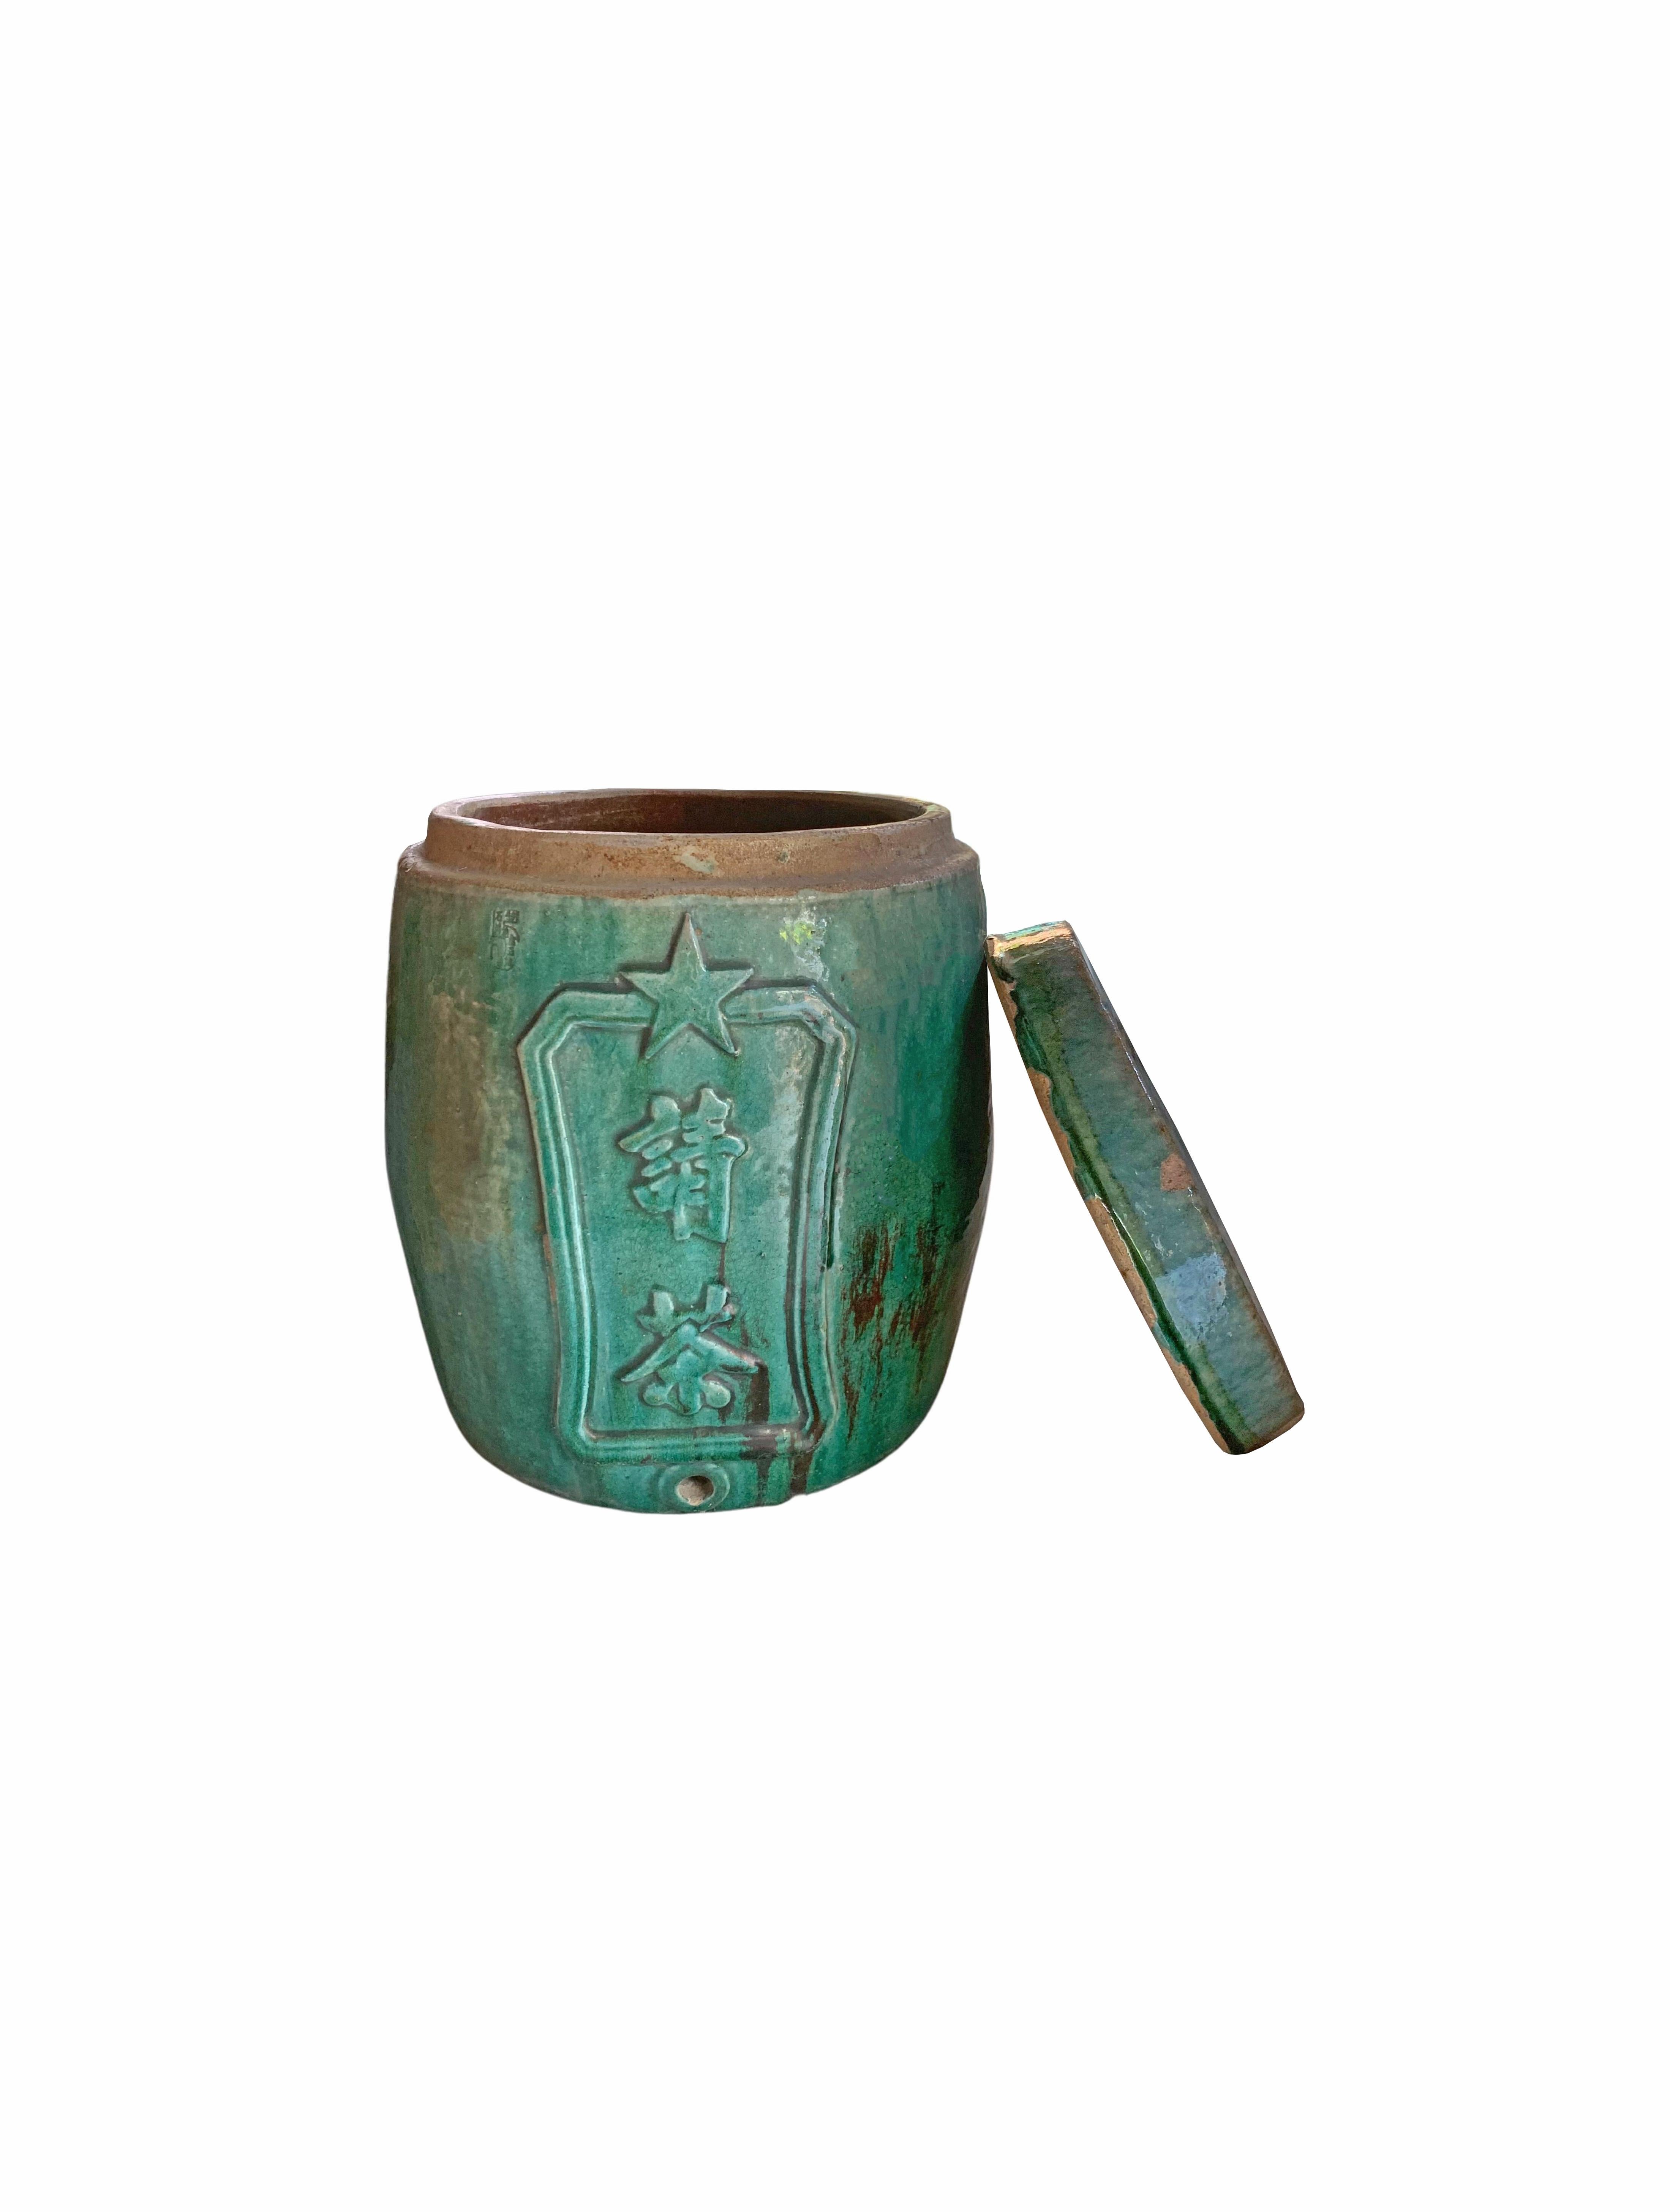 This lidded container of earthenware features a green glaze, known as 'Shiwan Ware' from China's Shiwanzhen district near Guangdong. It was originally used as a tea dispenser hence the small hole on its lower front side. The engraved characters on